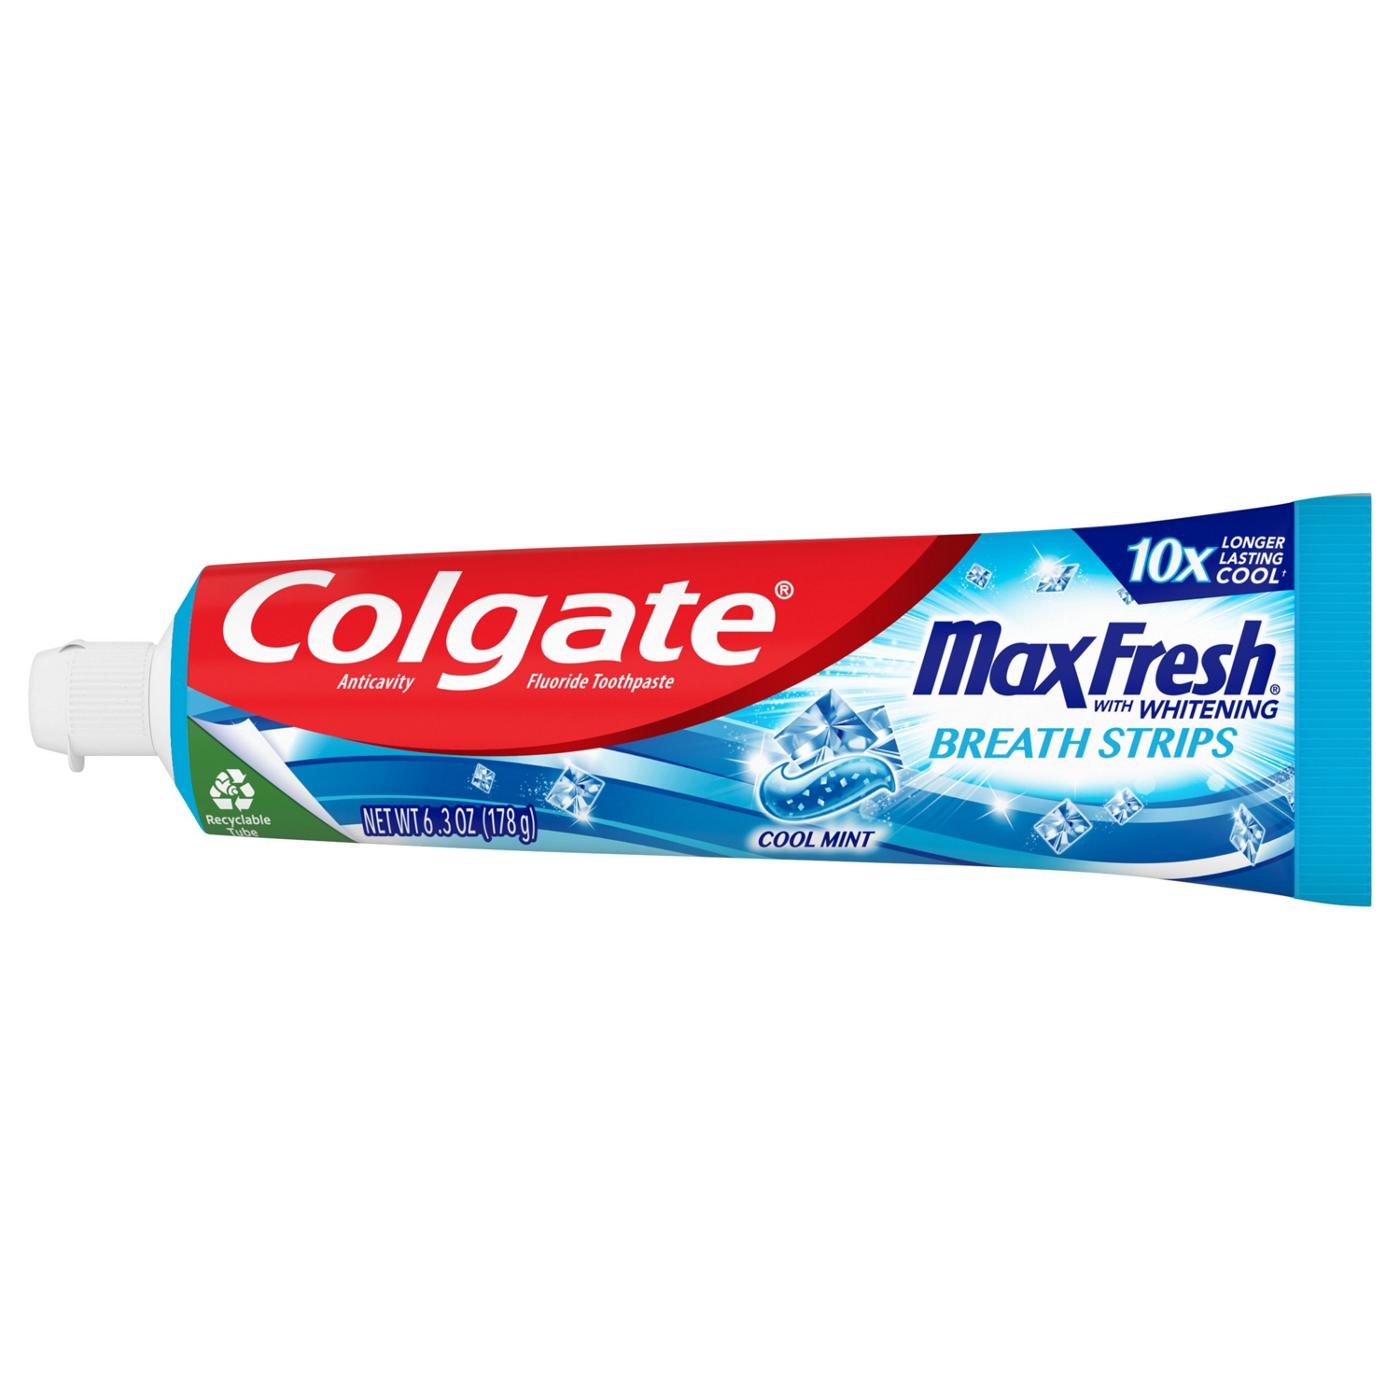 Colgate Max Fresh Anticavity Toothpaste - Cool Mint; image 3 of 15